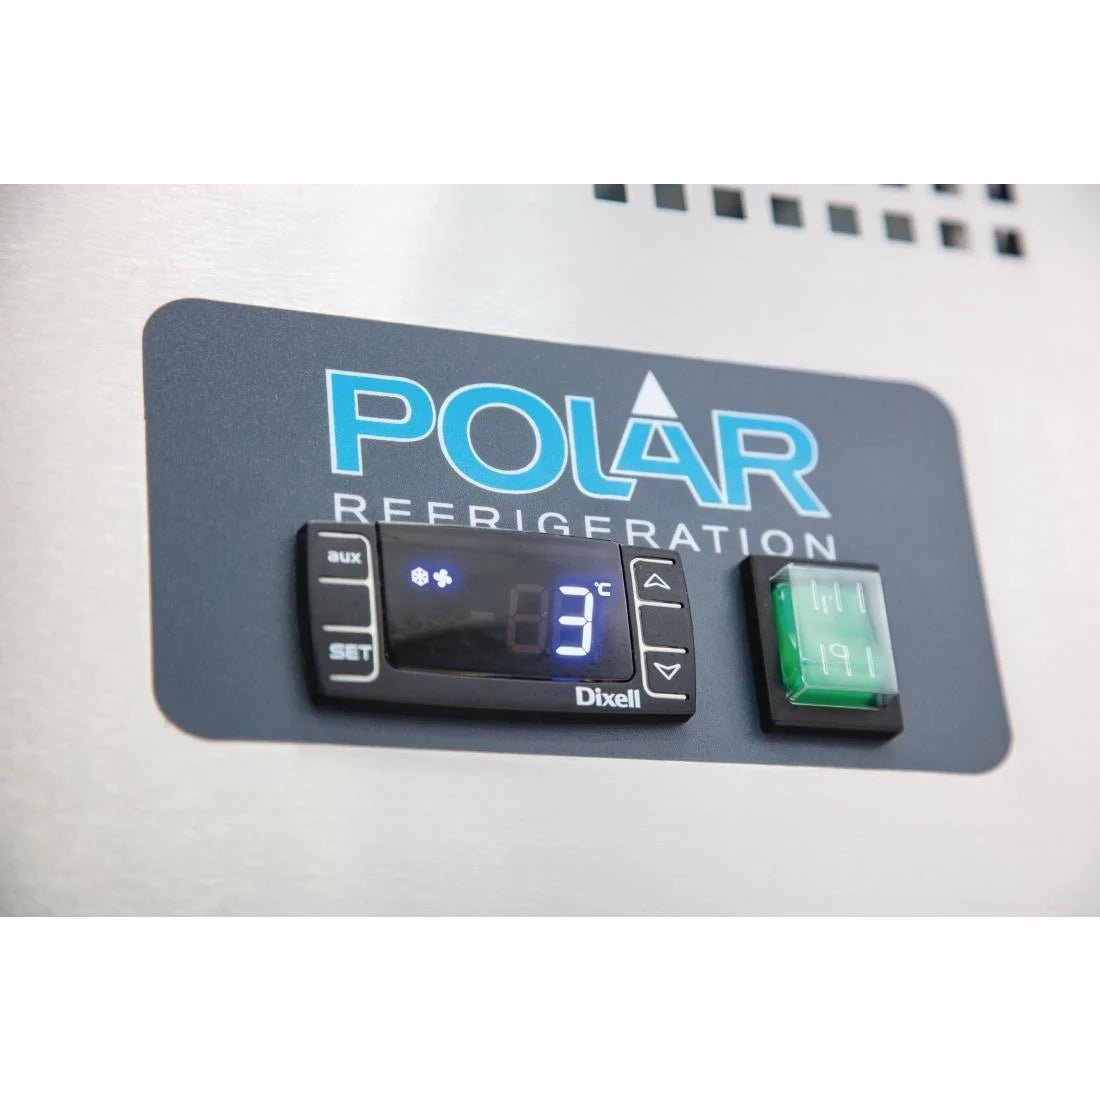 Polar U-Series Triple Door Refrigerated Gastronorm Saladette Counter.Product Ref:00683.Model:CT394. 🚚 5-7 Days Delivery